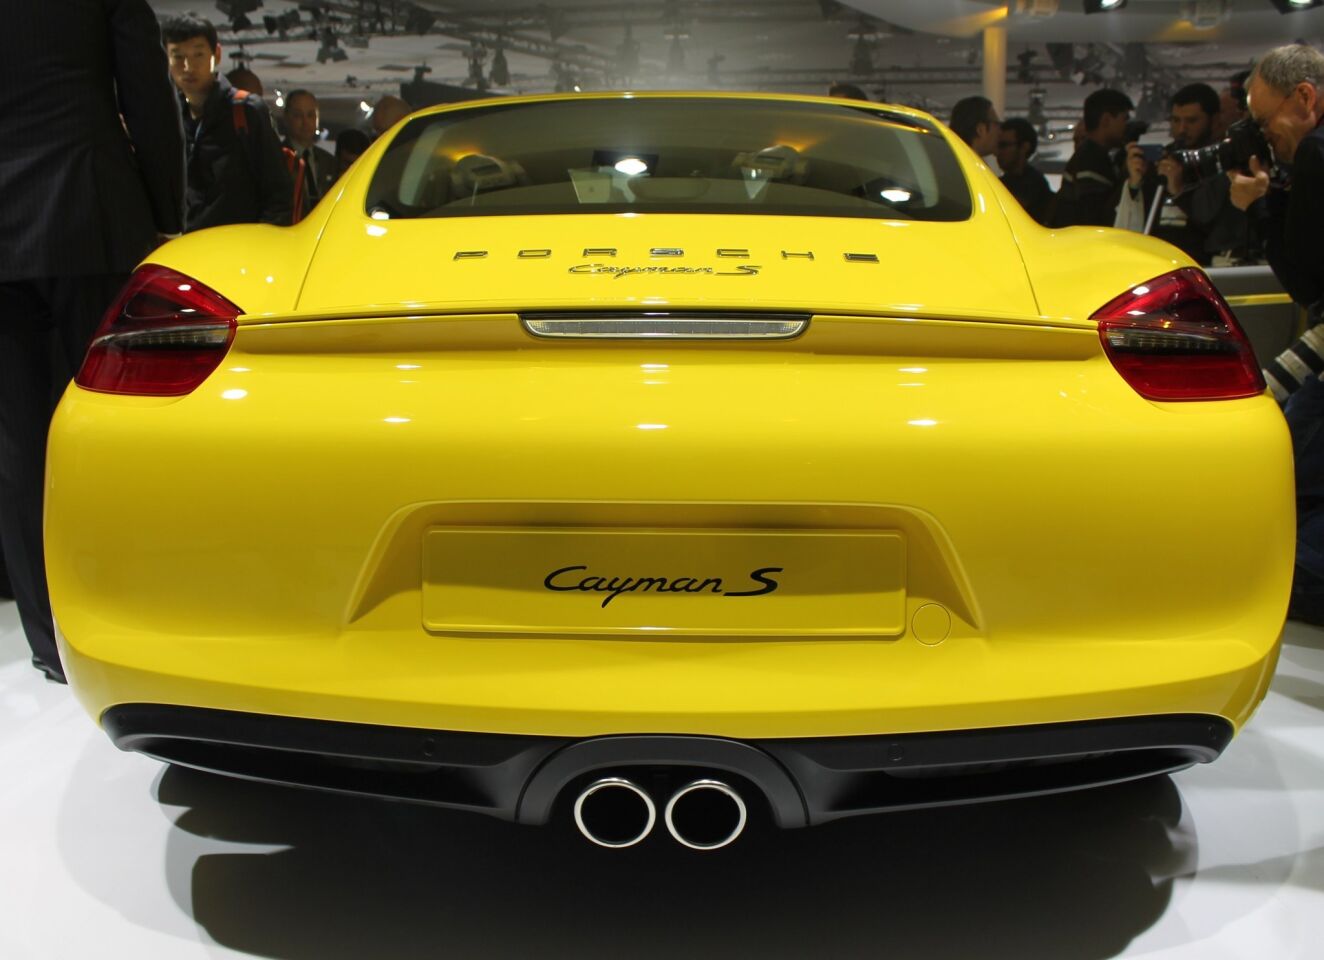 The 2014 Porsche Cayman makes its world debut at the 2012 L.A. Auto Show.